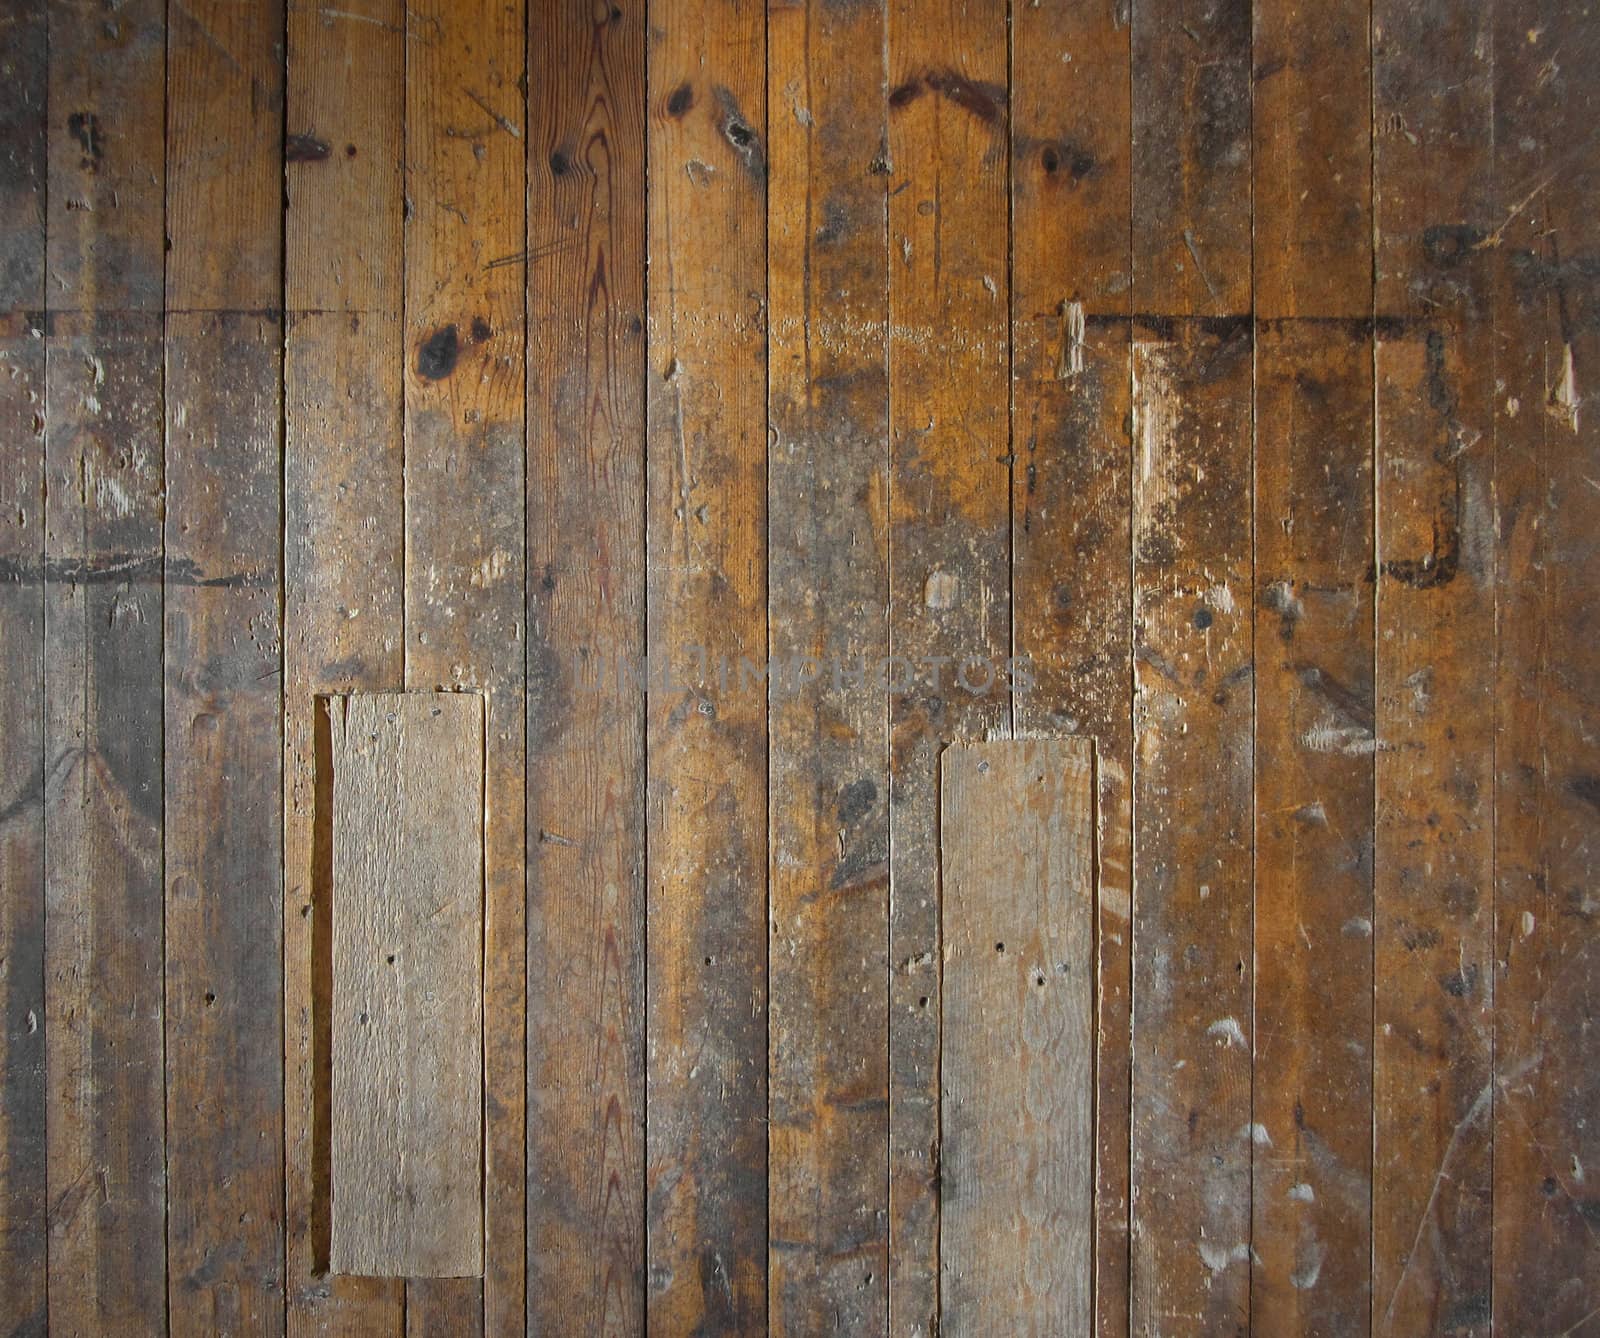 Old aged wooden plank floor or wall structure